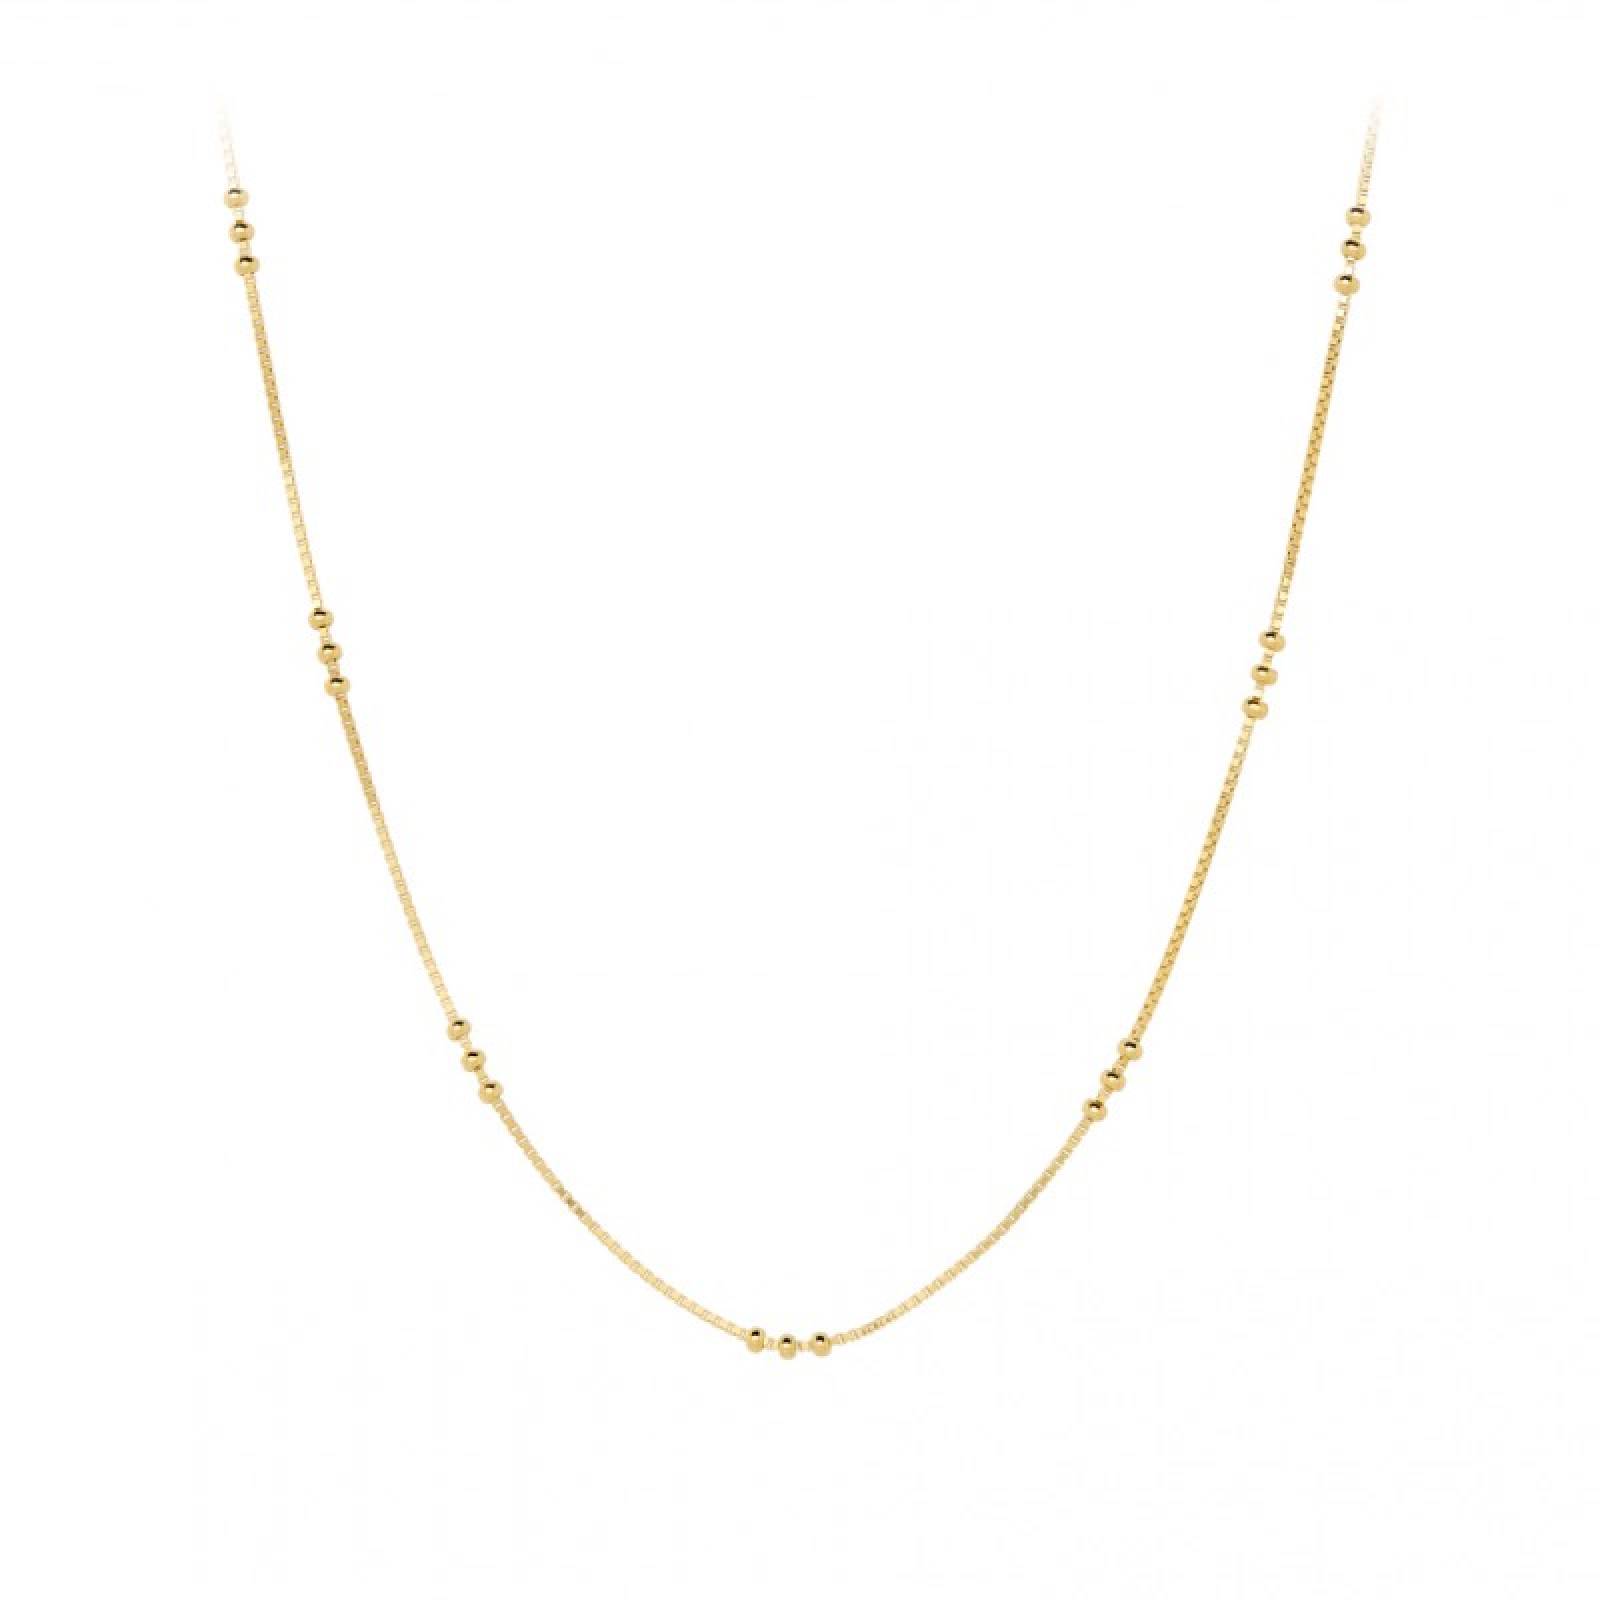 Eva Necklace In Gold By Pernille Corydon